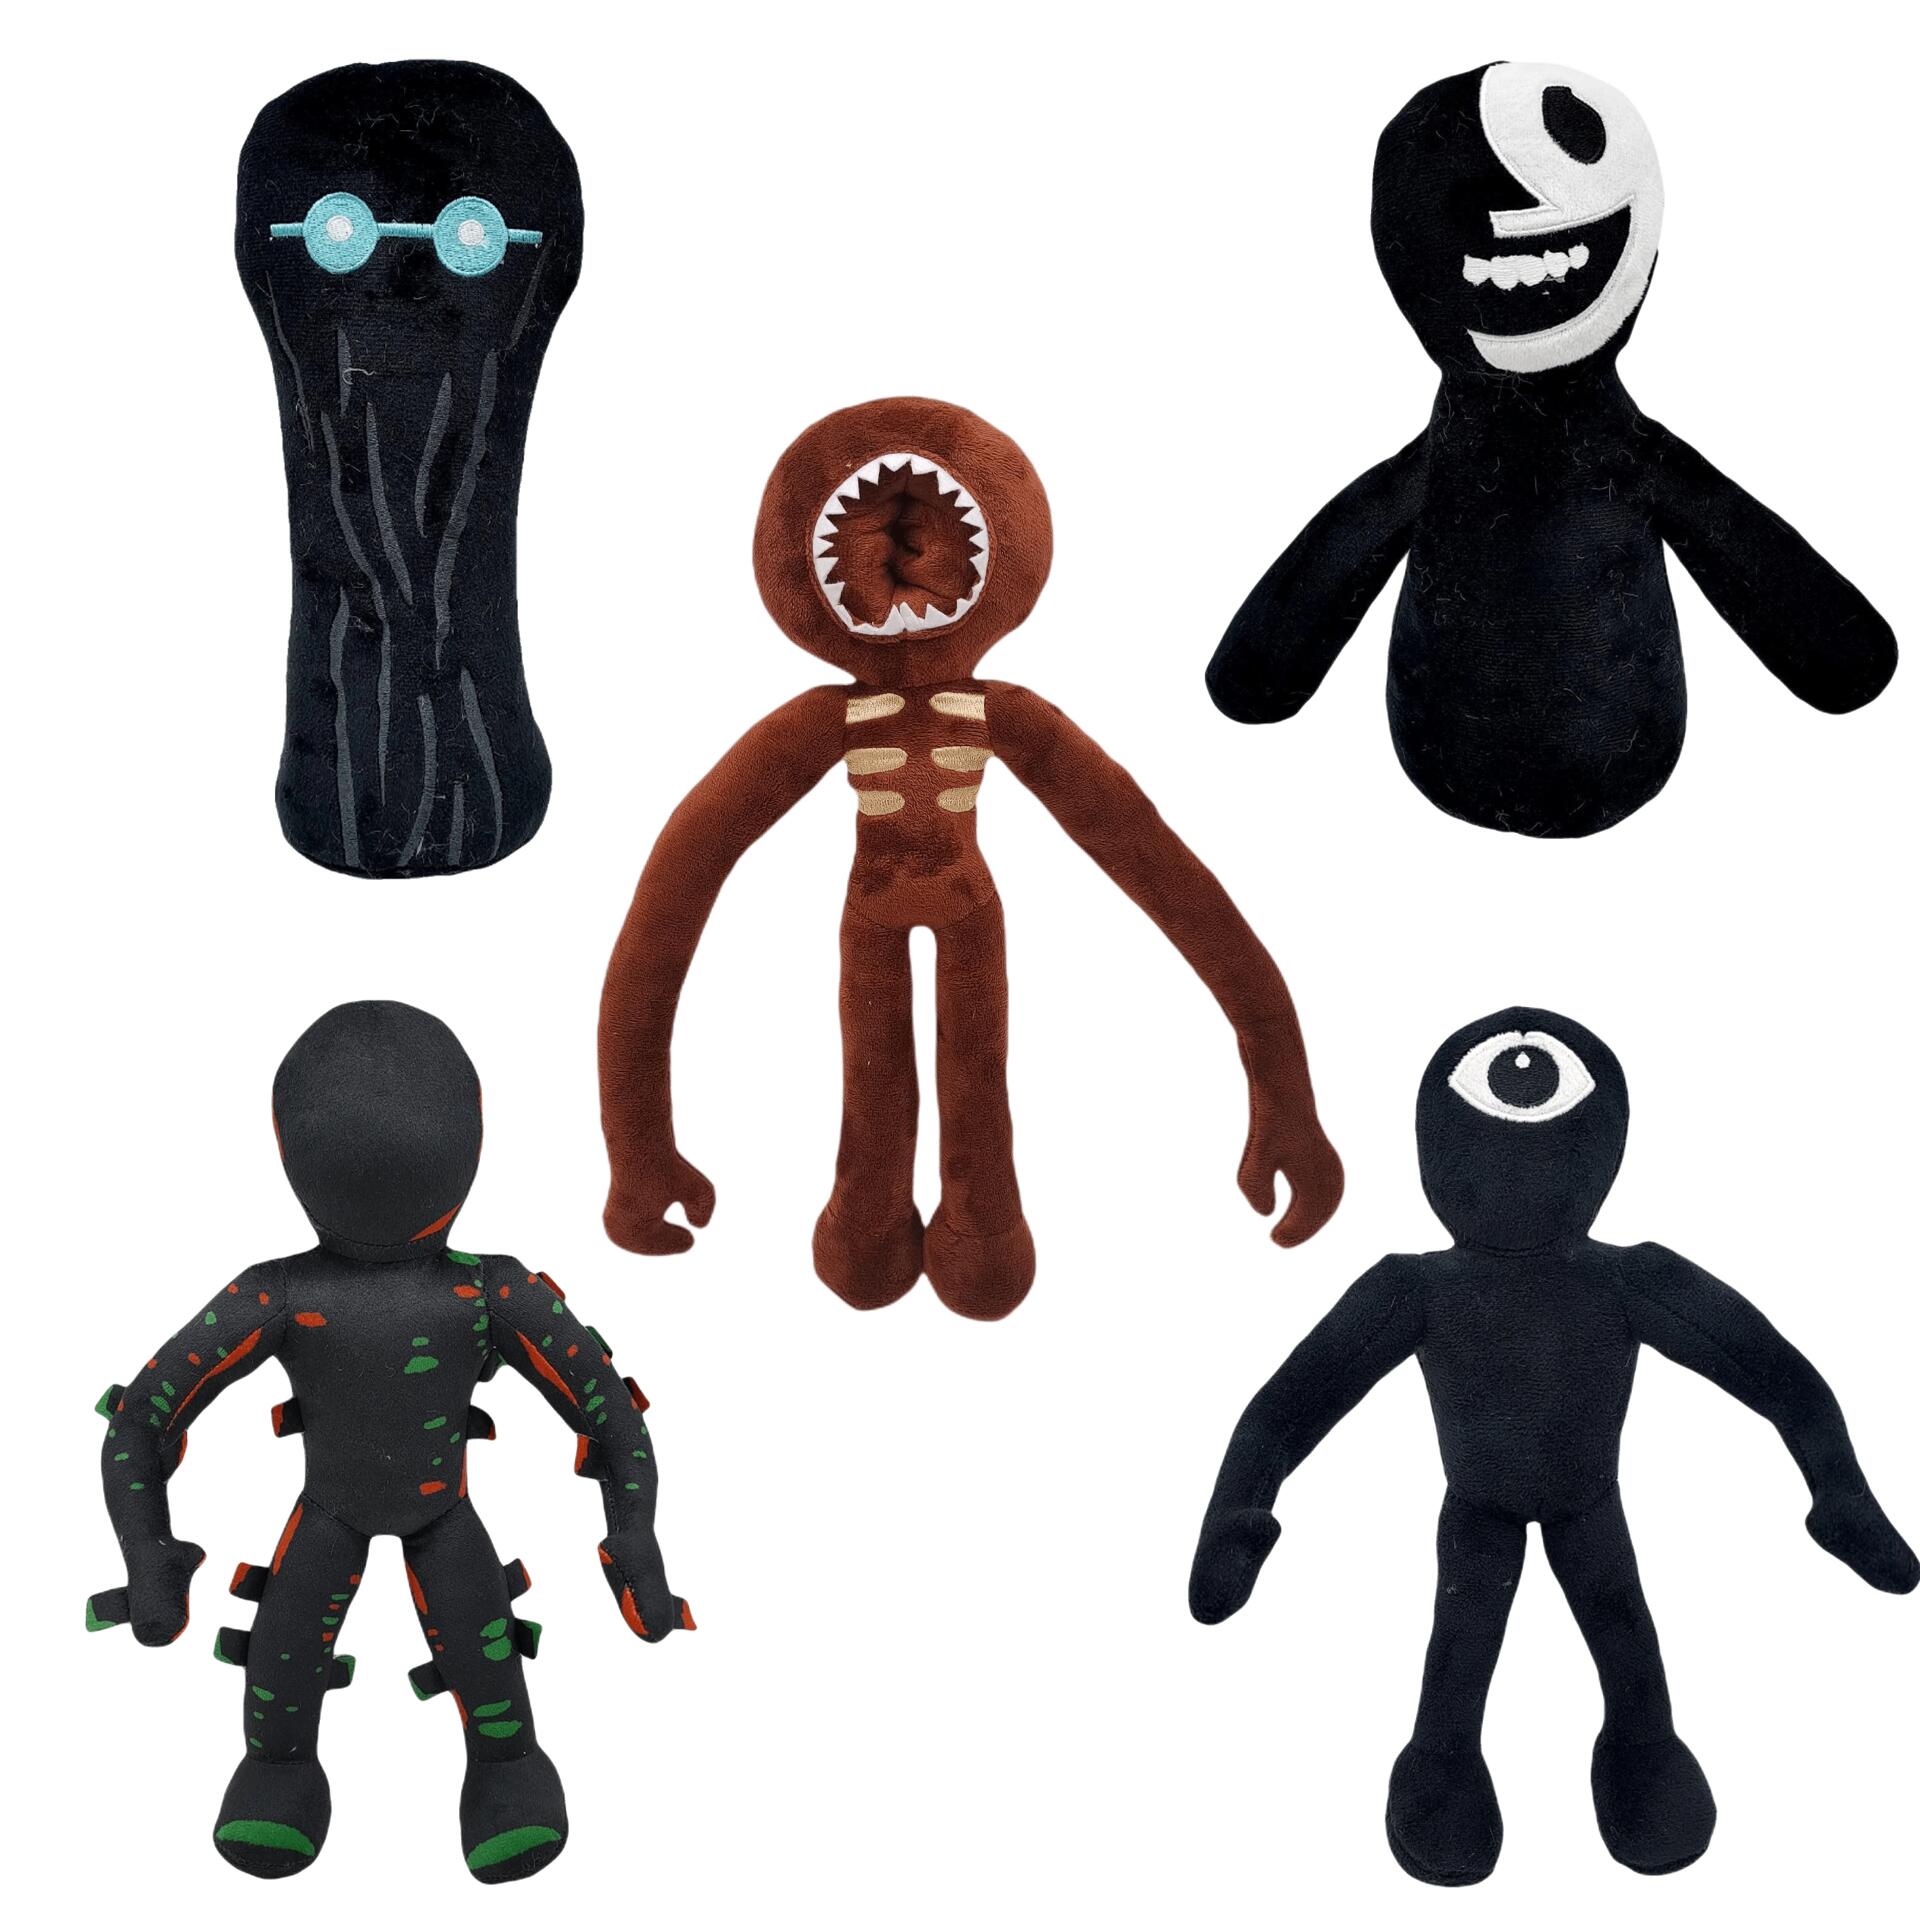  Doors Plush - 13 Figure Plushies Toy for Fans Gift